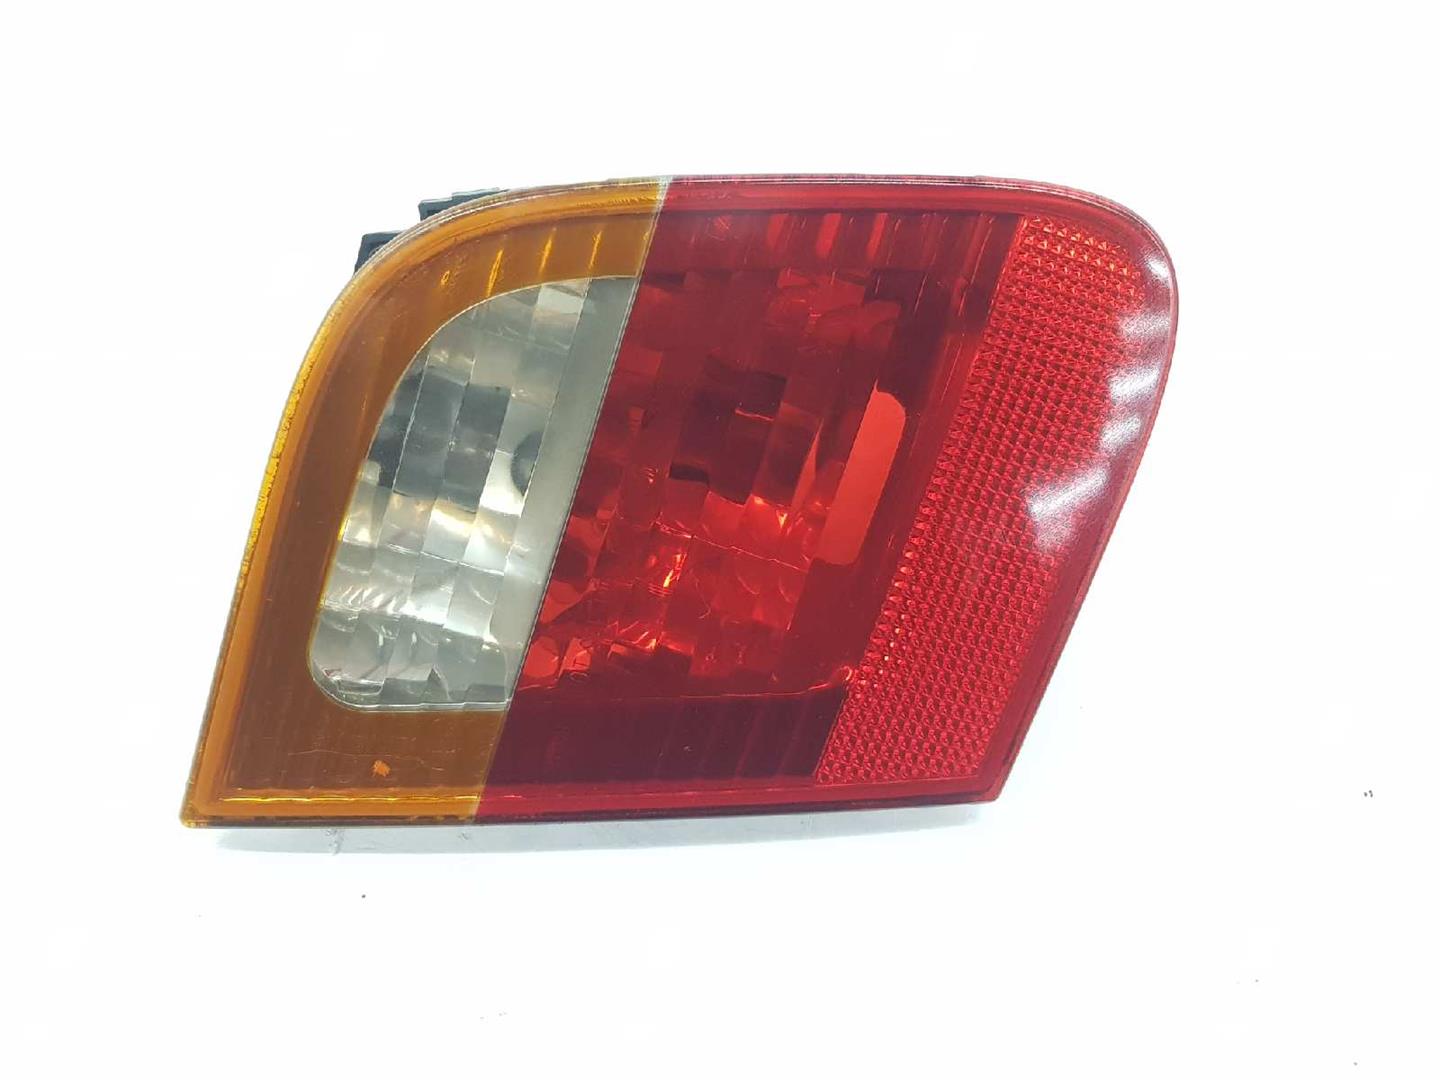 BMW 3 Series E46 (1997-2006) Left Side Tailgate Taillight 63216907945, 6907945, 63216907945 19935651